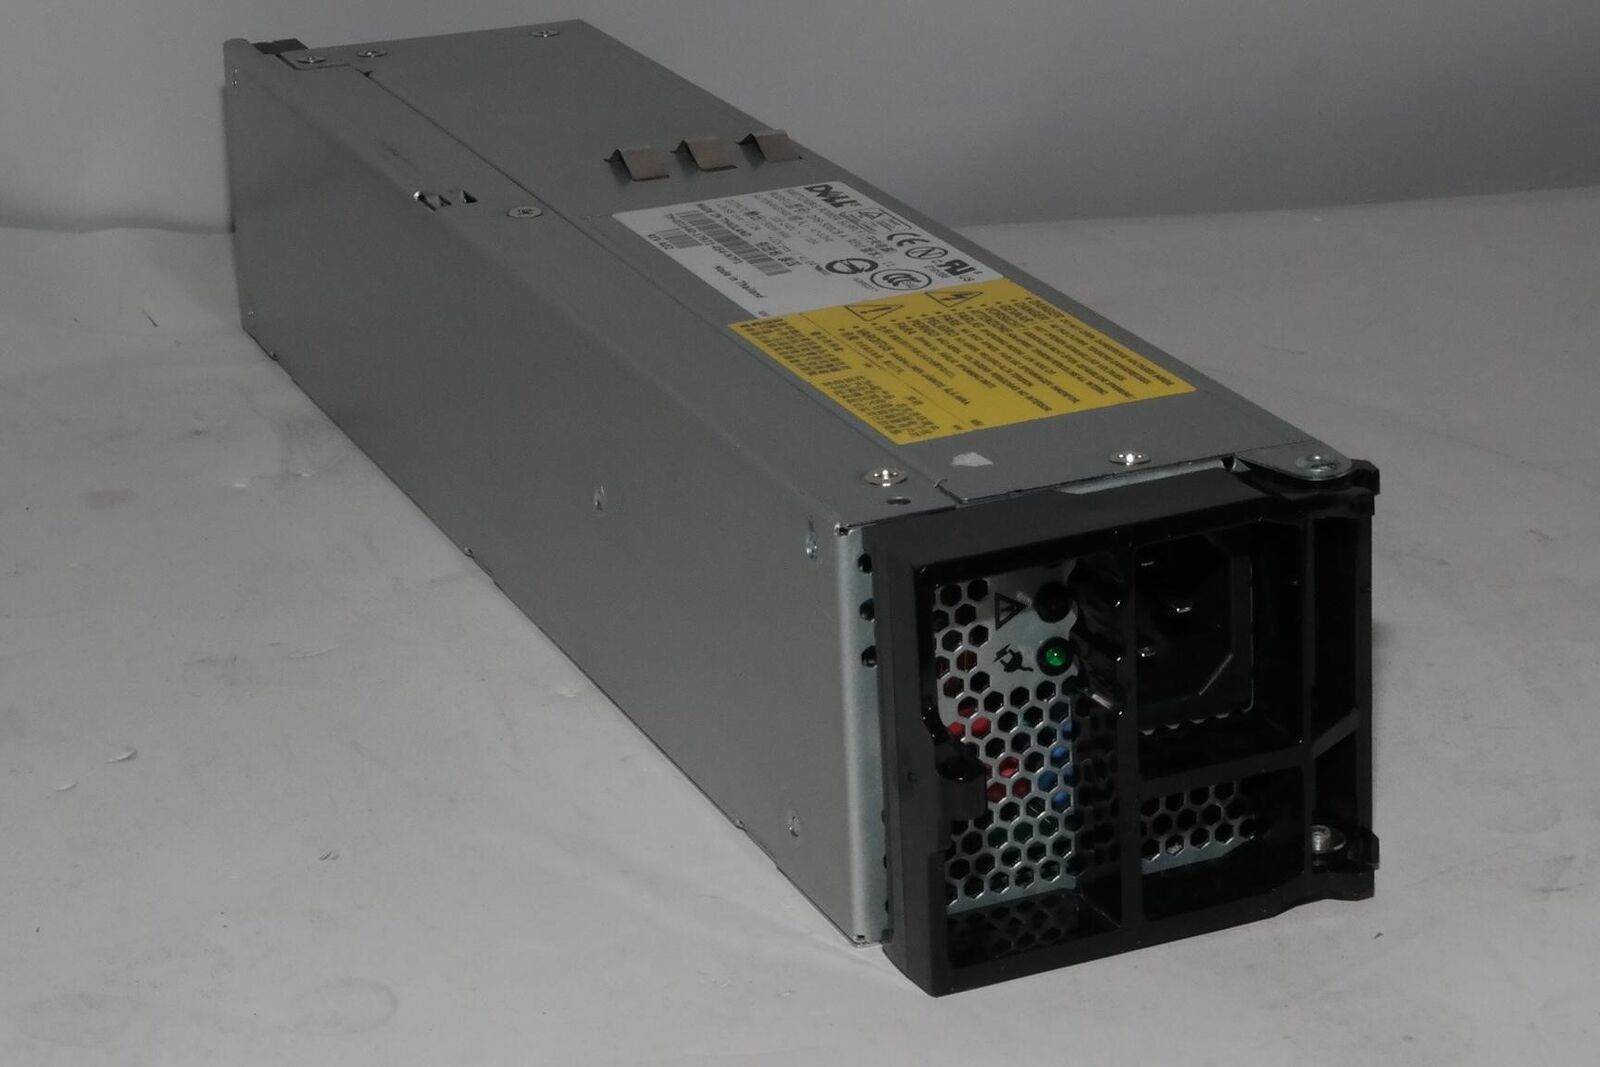 DELL POWEREDGE 2650 500W SERVER MODULAR SWITCHING PWR SUPPLY DPS-500CB A J1540